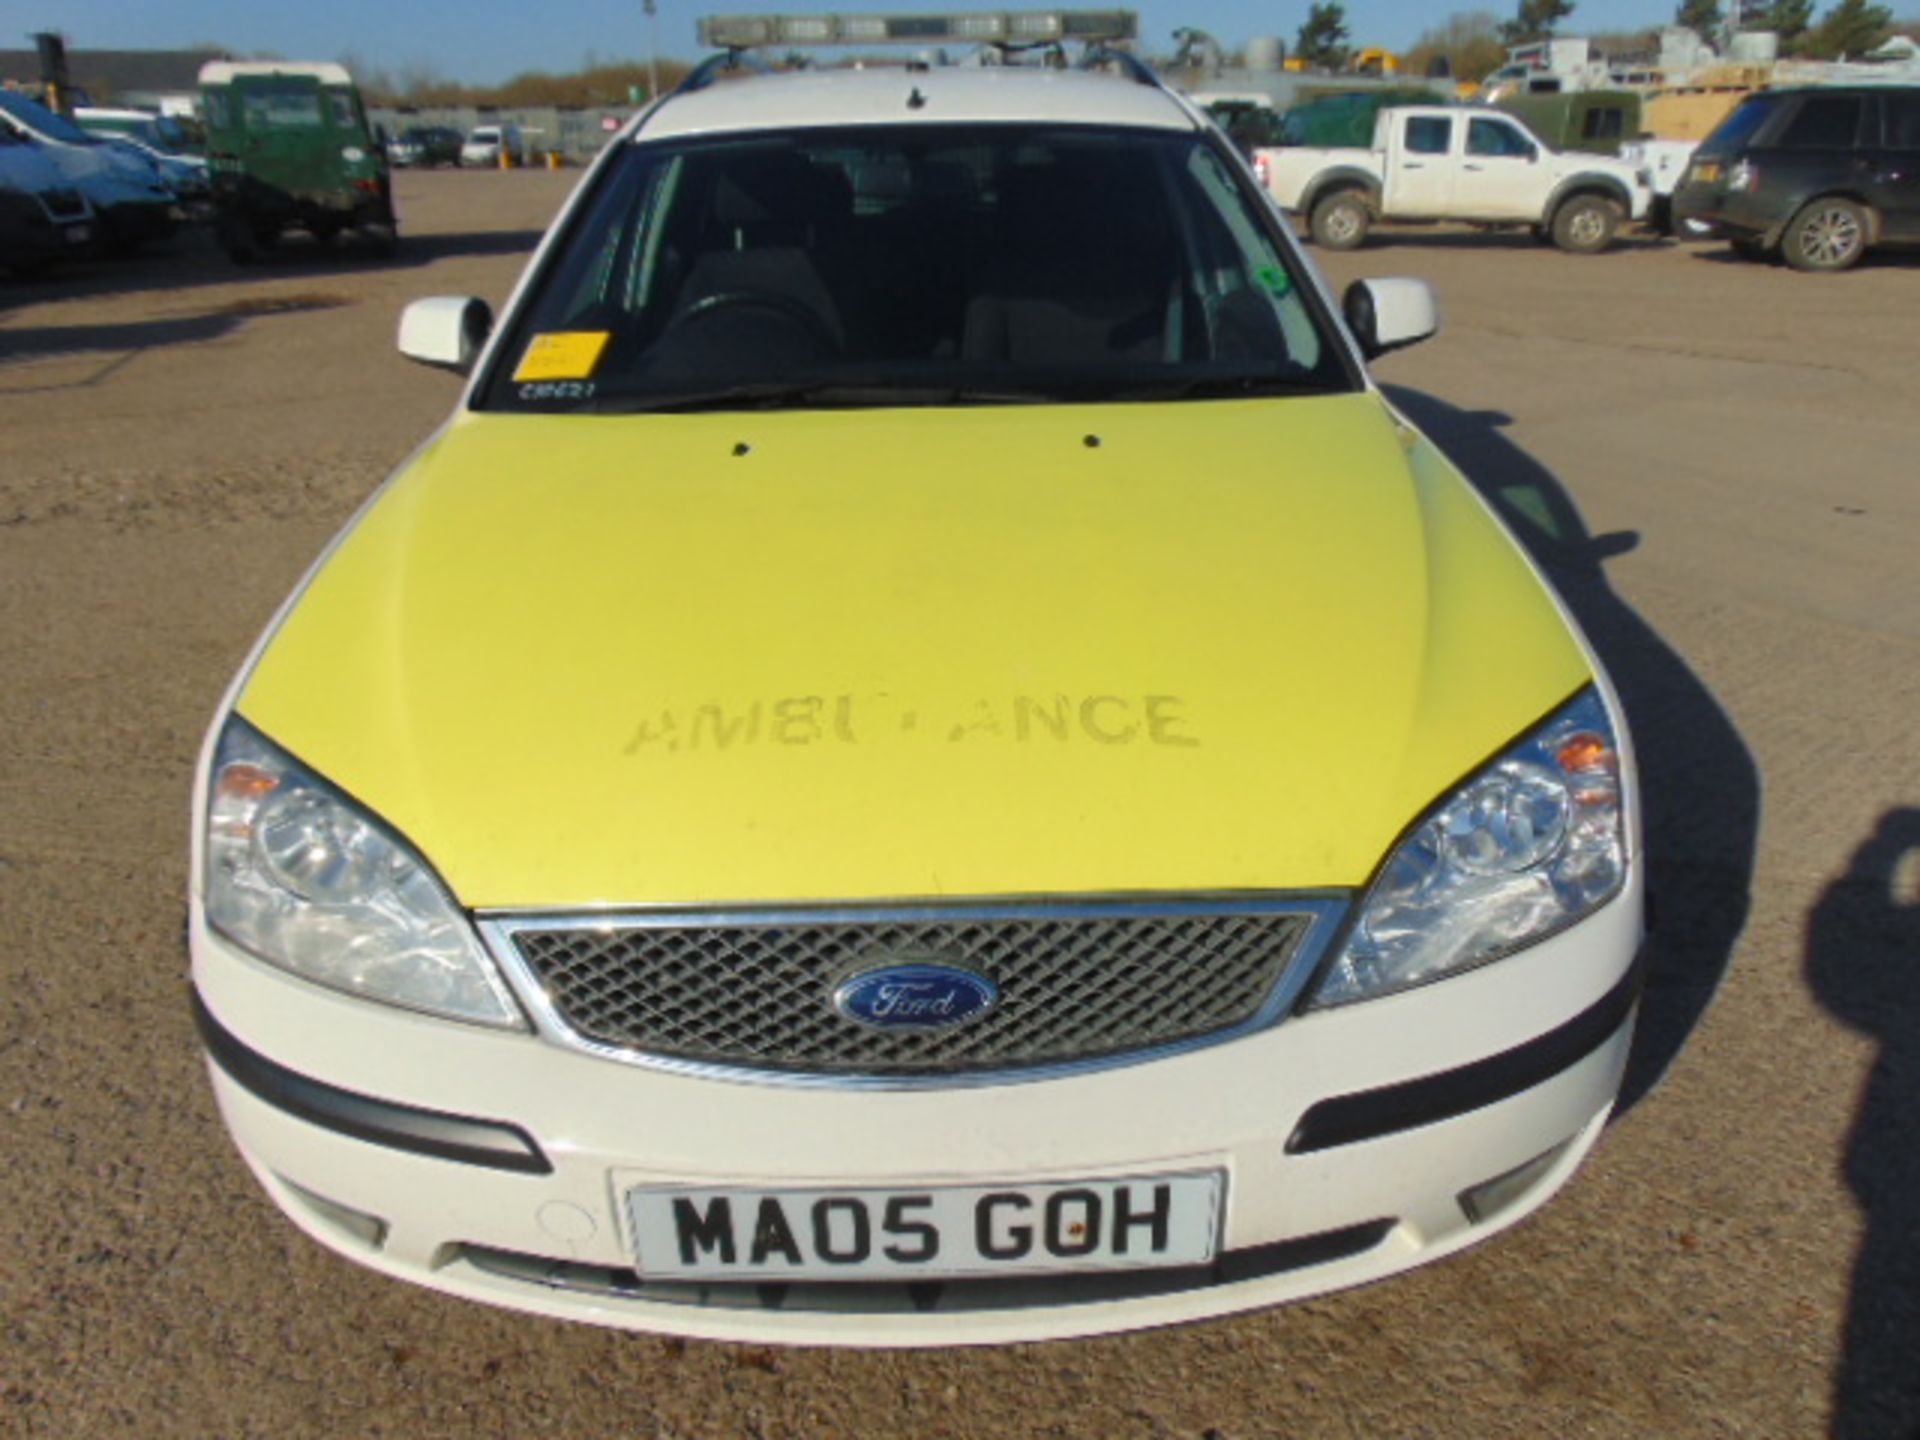 Ford Mondeo 2.0 Turbo diesel ambulance - Image 2 of 14